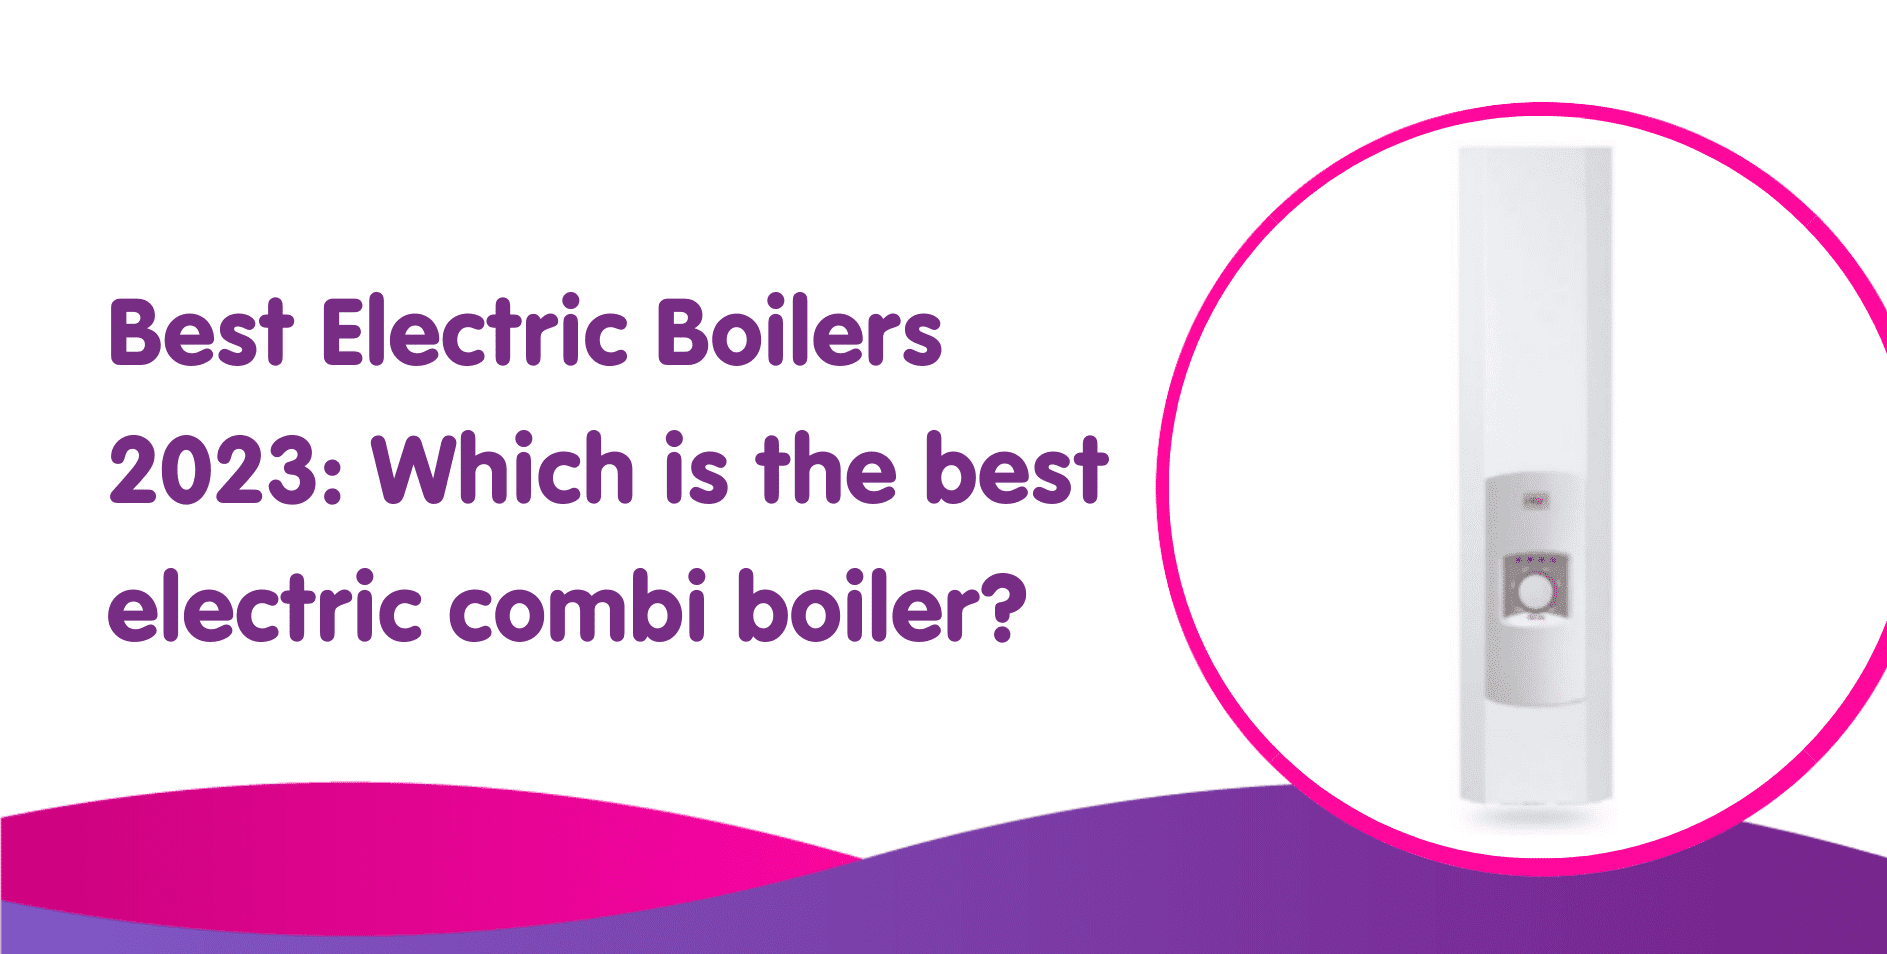 https://www.boilercentral.com/wp-content/uploads/Best-Electric-Boilers-2023_-Which-is-the-best-electric-combi-boiler.png